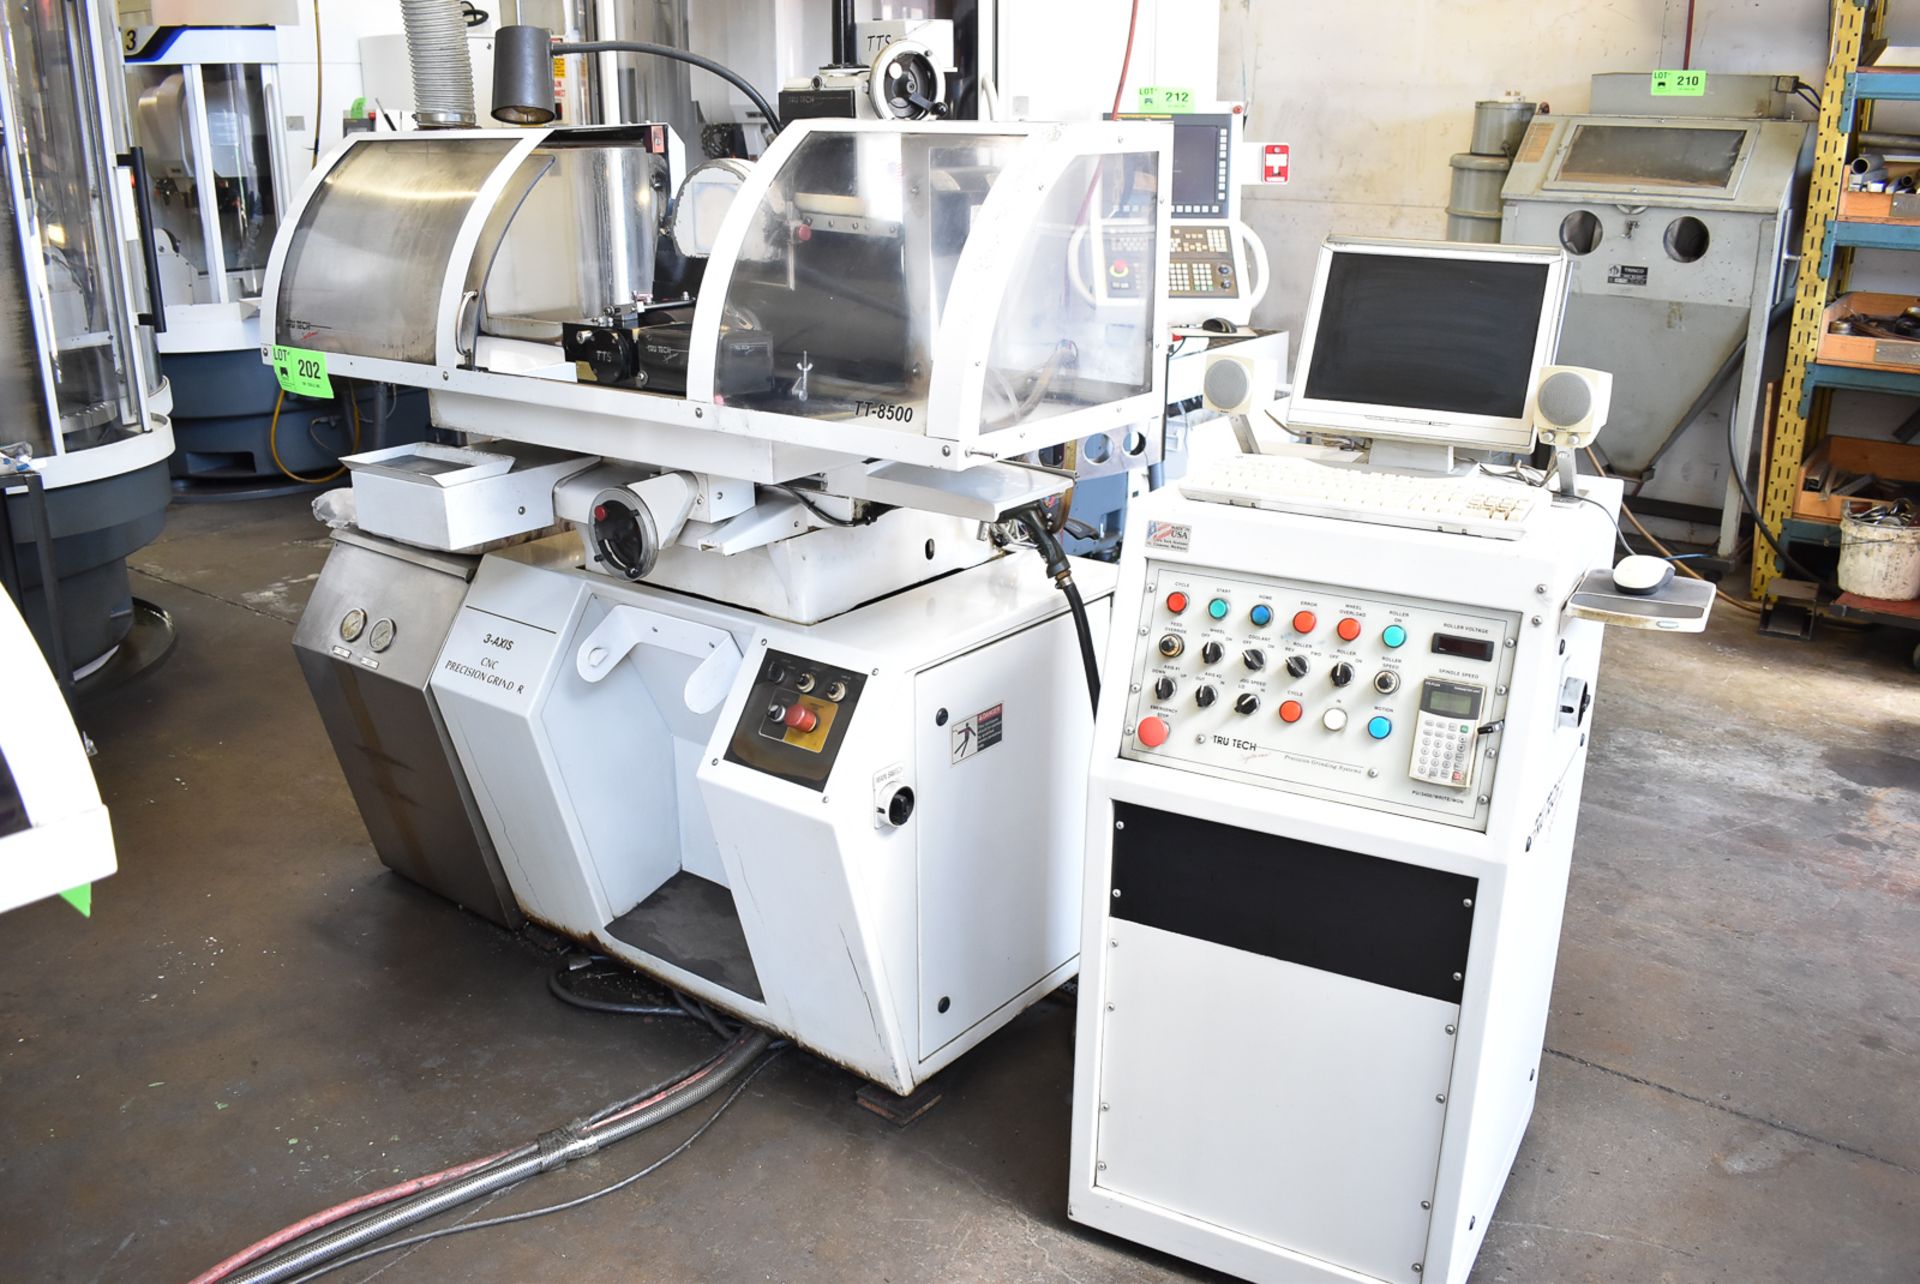 TRUTECH (PURCHASED NEW IN 2002 $110K USD) TT-8500 3-AXIS CNC PRECISION GRINDER WITH TRU DELTA V4.6.8